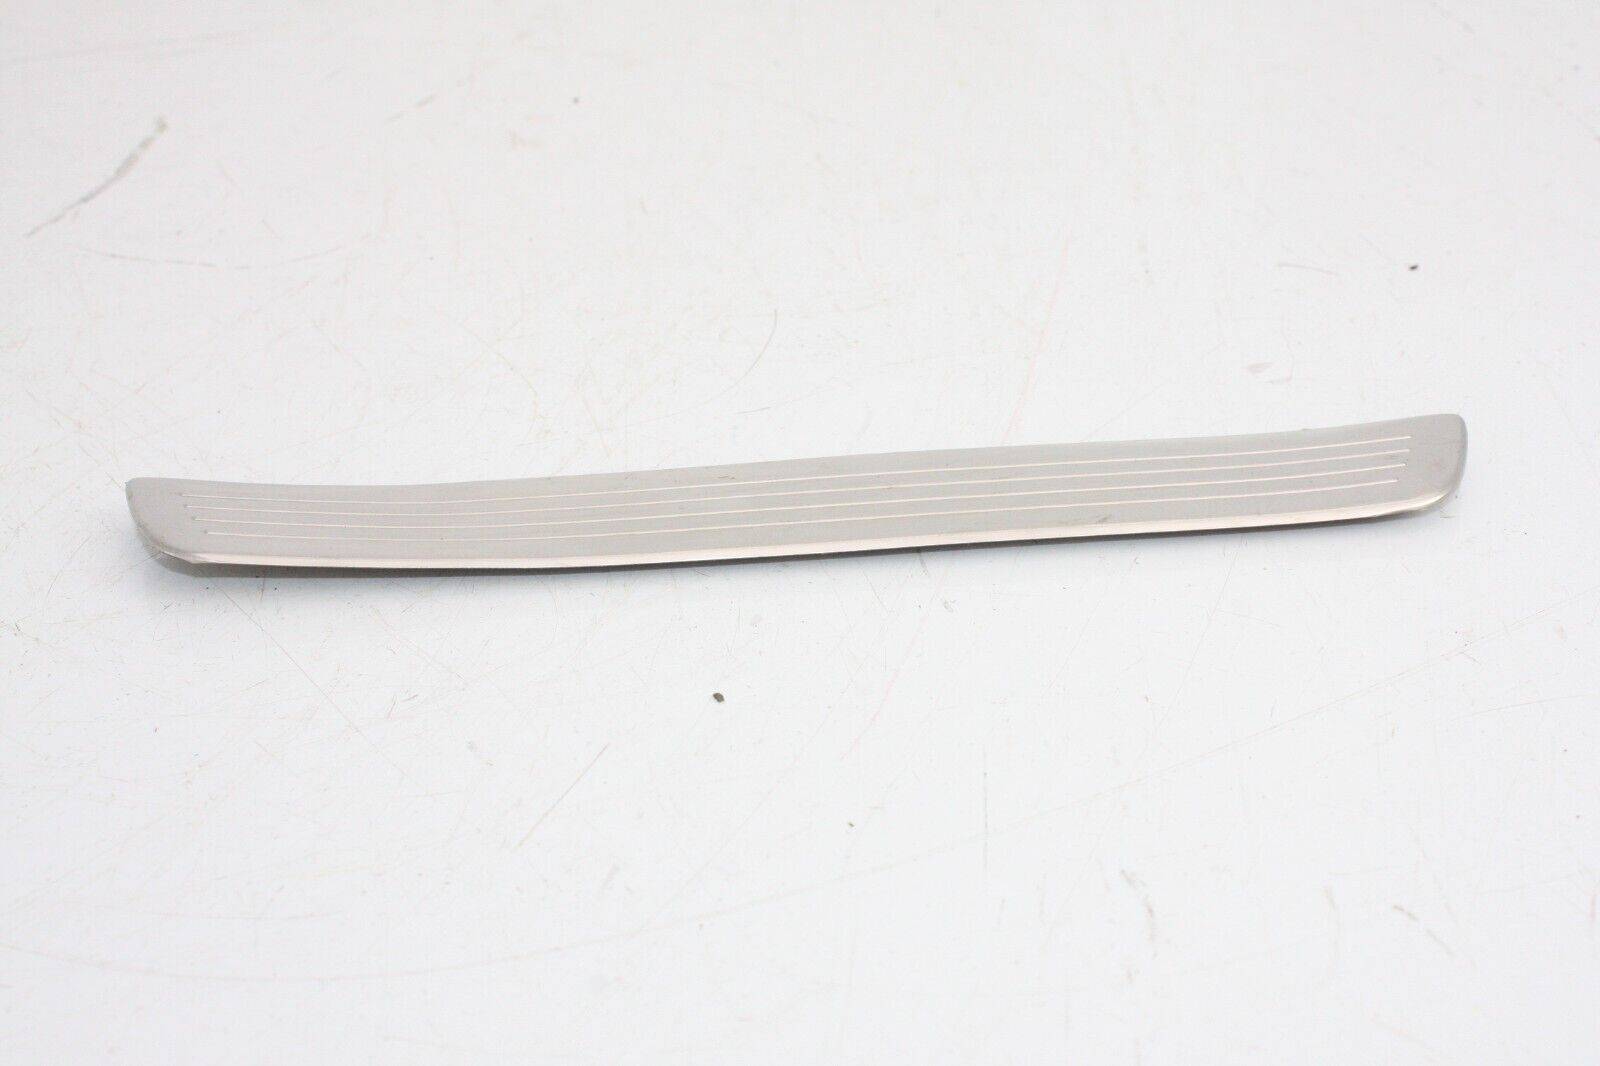 MERCEDES-S-CLASS-W222-FRONT-RIGHT-SIDE-DOOR-SILL-TRIM-COVER-2013-TO-2017-175421099973-4